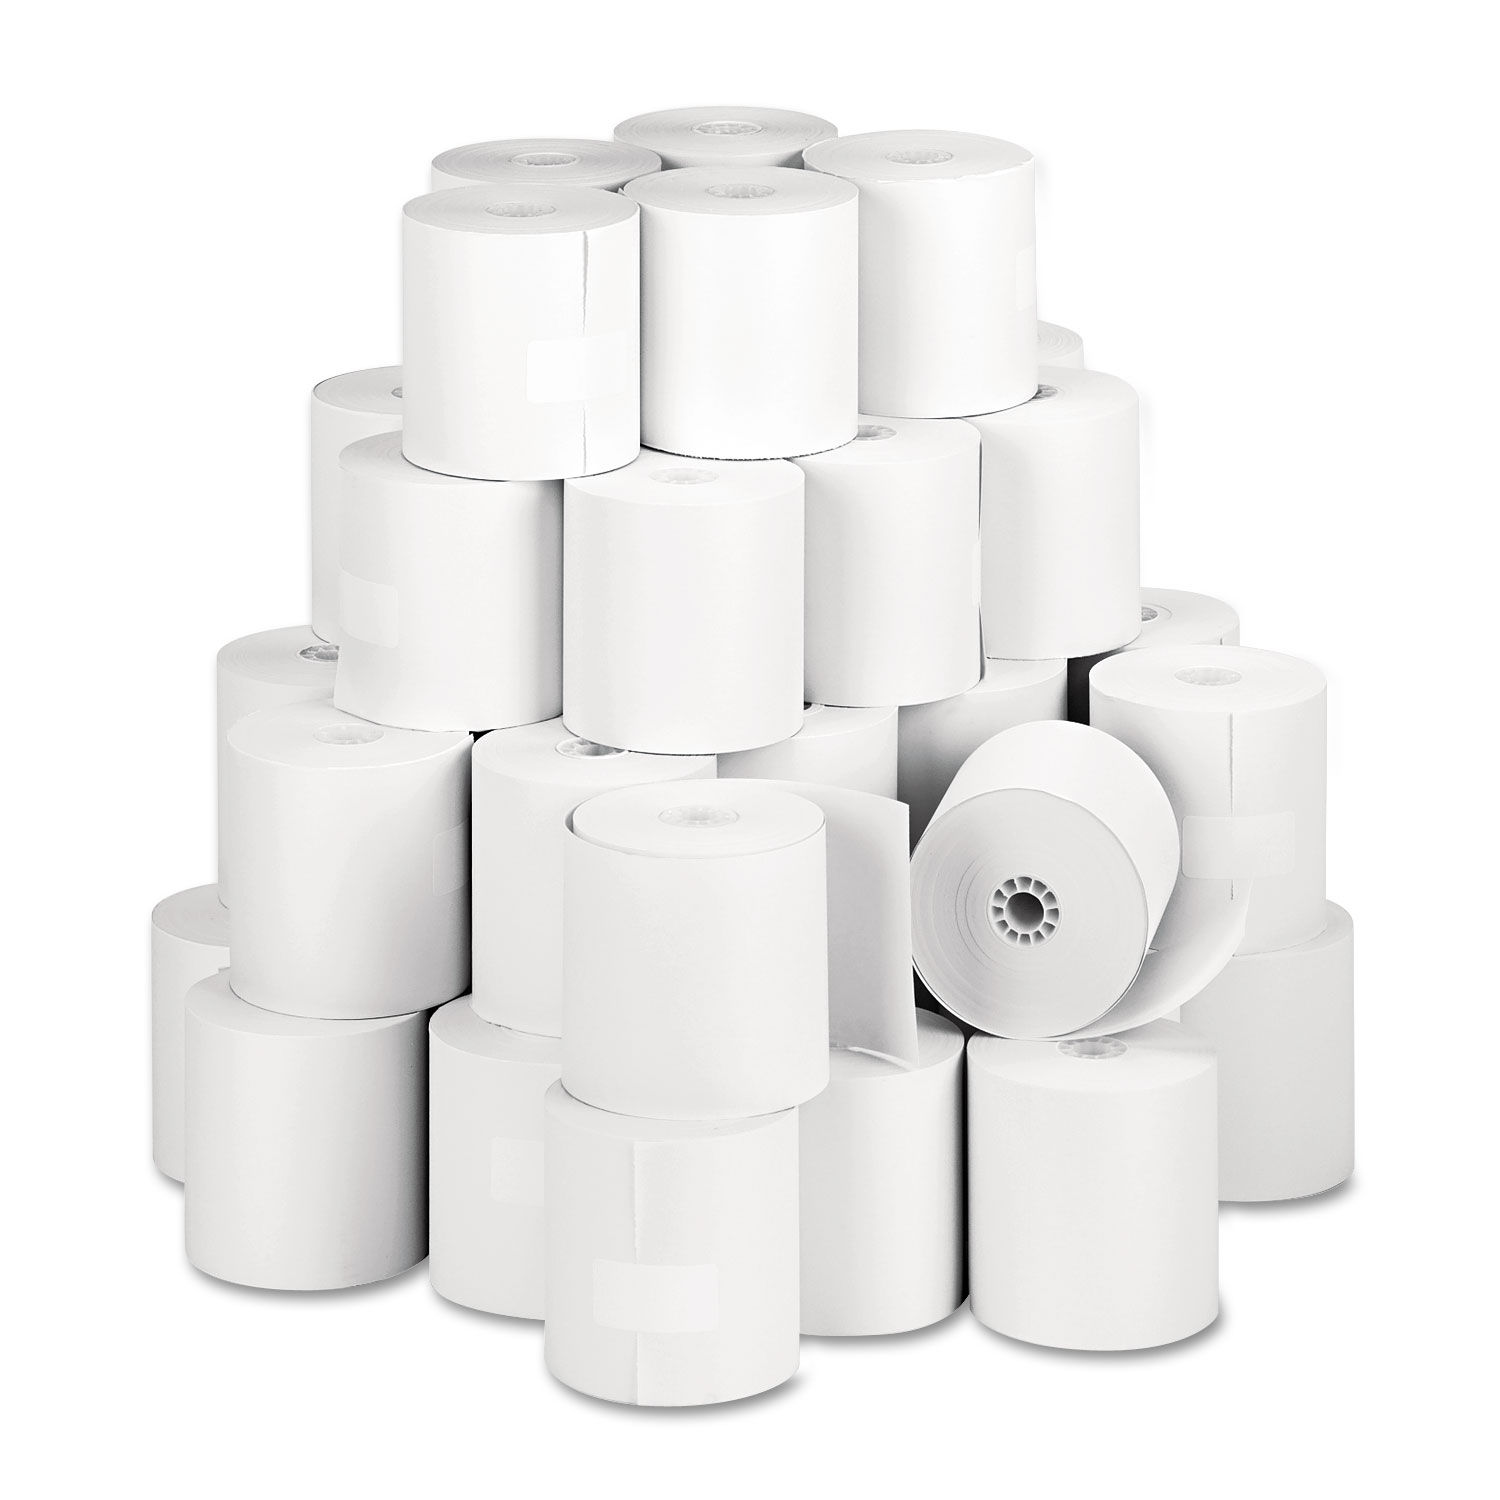 Direct Thermal Printing Thermal Paper Rolls 3.13" x 273 ft, White, 50/Carton